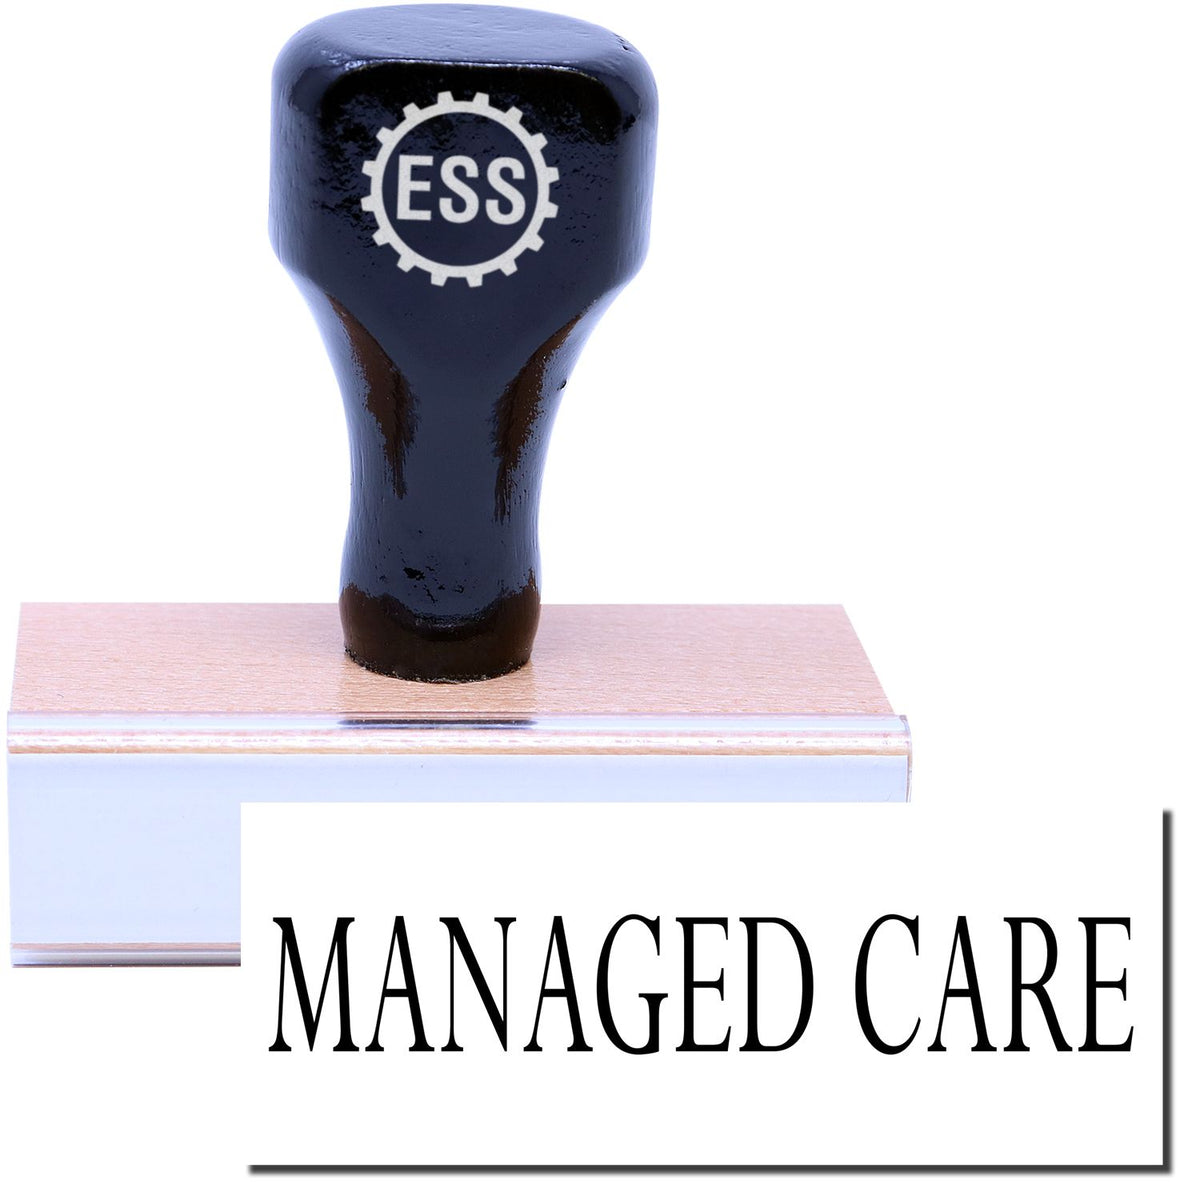 A stock office rubber stamp with a stamped image showing how the text &quot;MANAGED CARE&quot; is displayed after stamping.